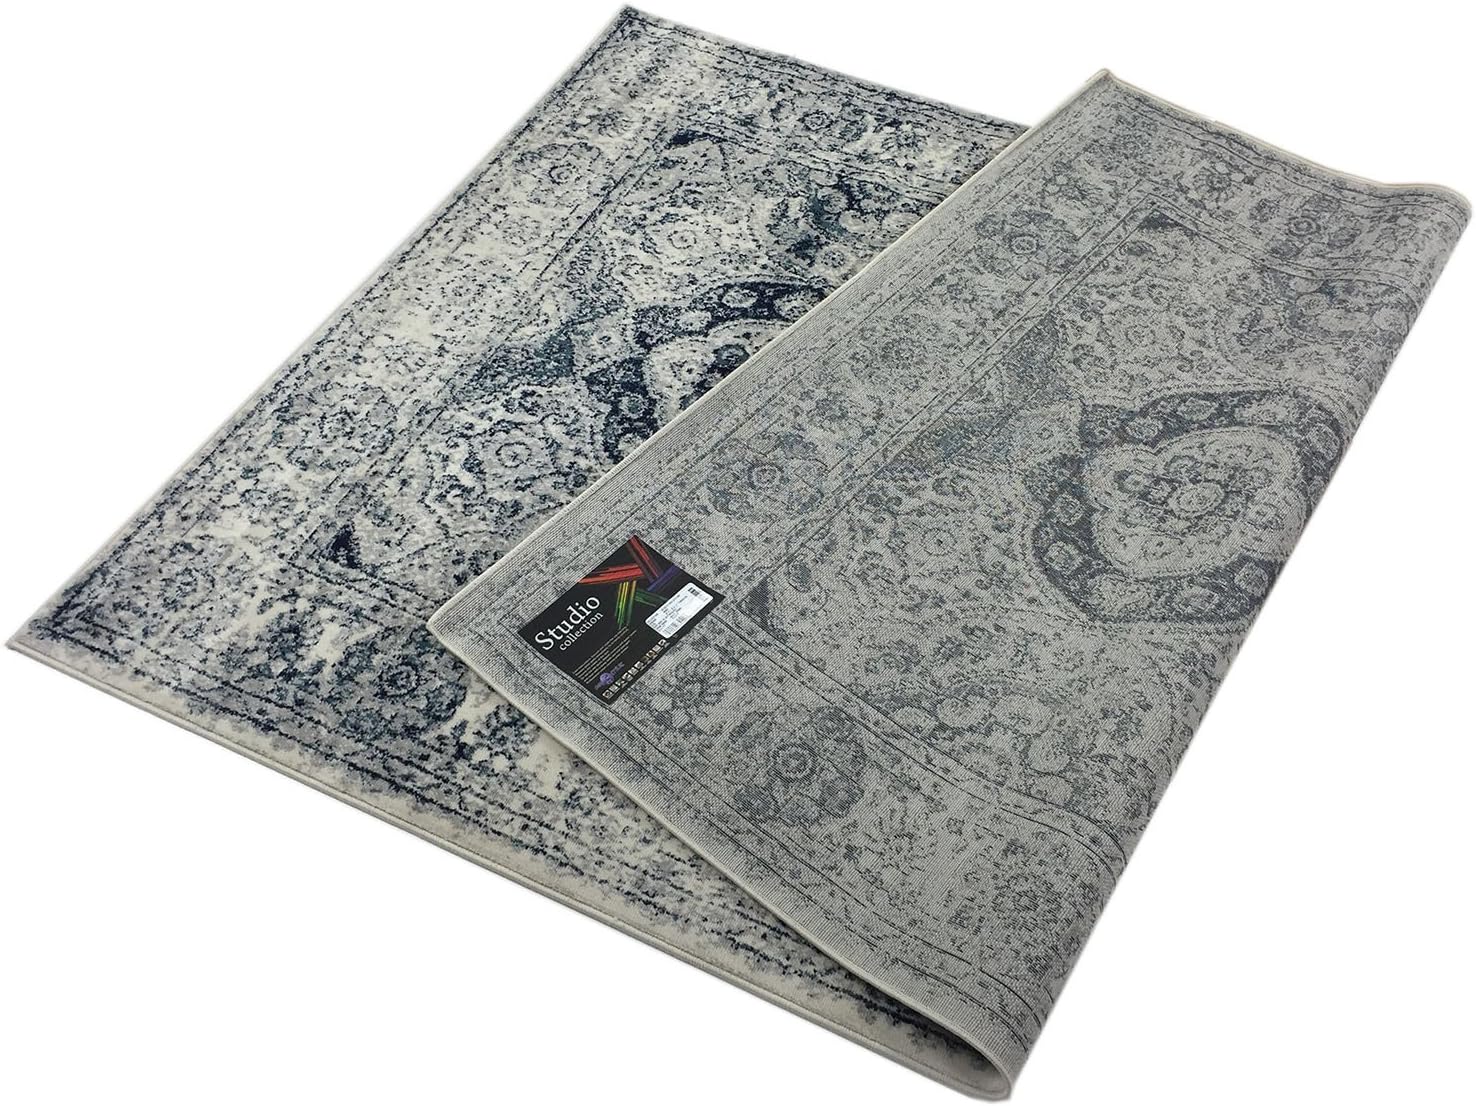 Studio Collection Vintage French Aubusson Design Contemporary Modern Area Rug (Aubusson Ivory / Navy, 5 x 7)